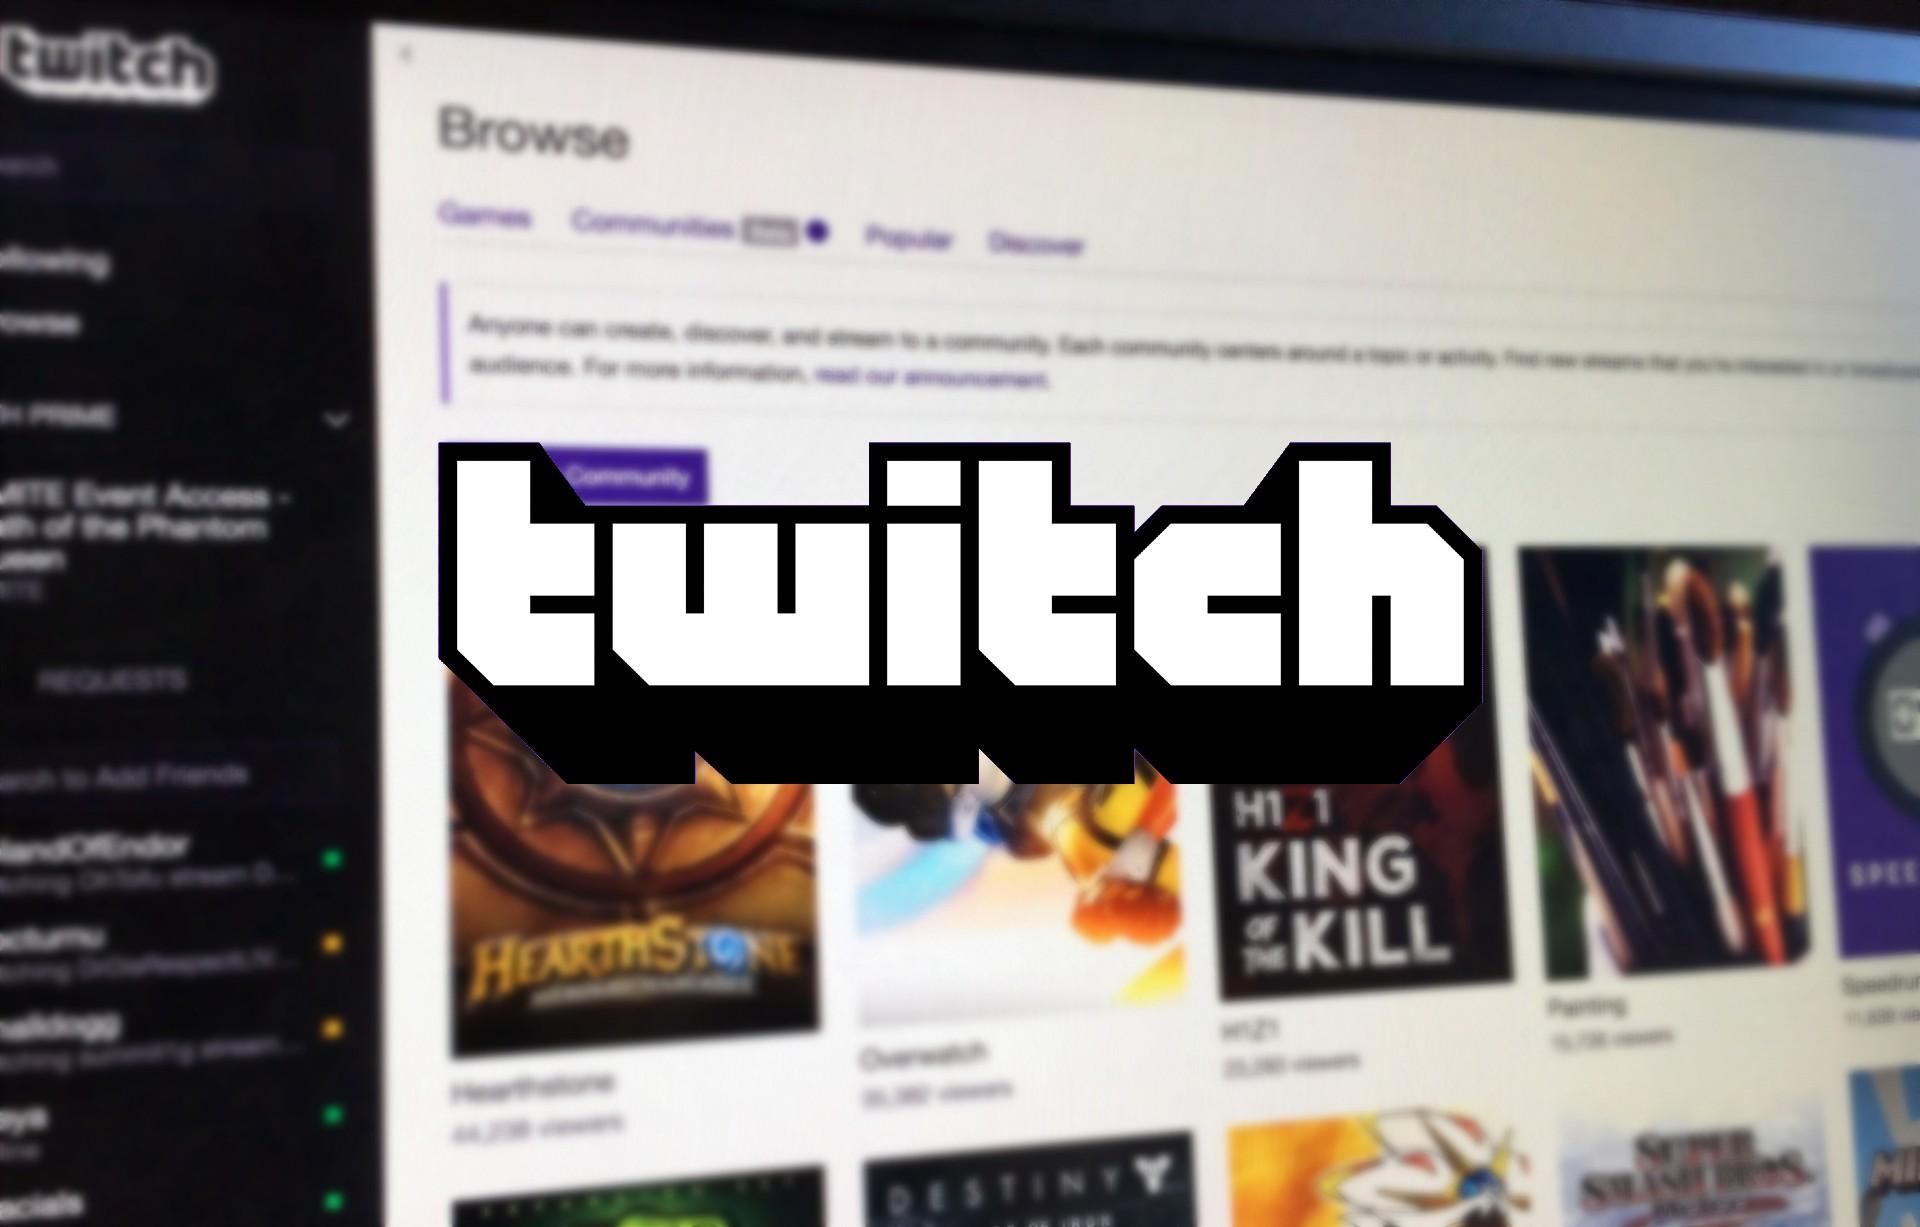 reportedly overhauling Twitch Prime to Prime Gaming